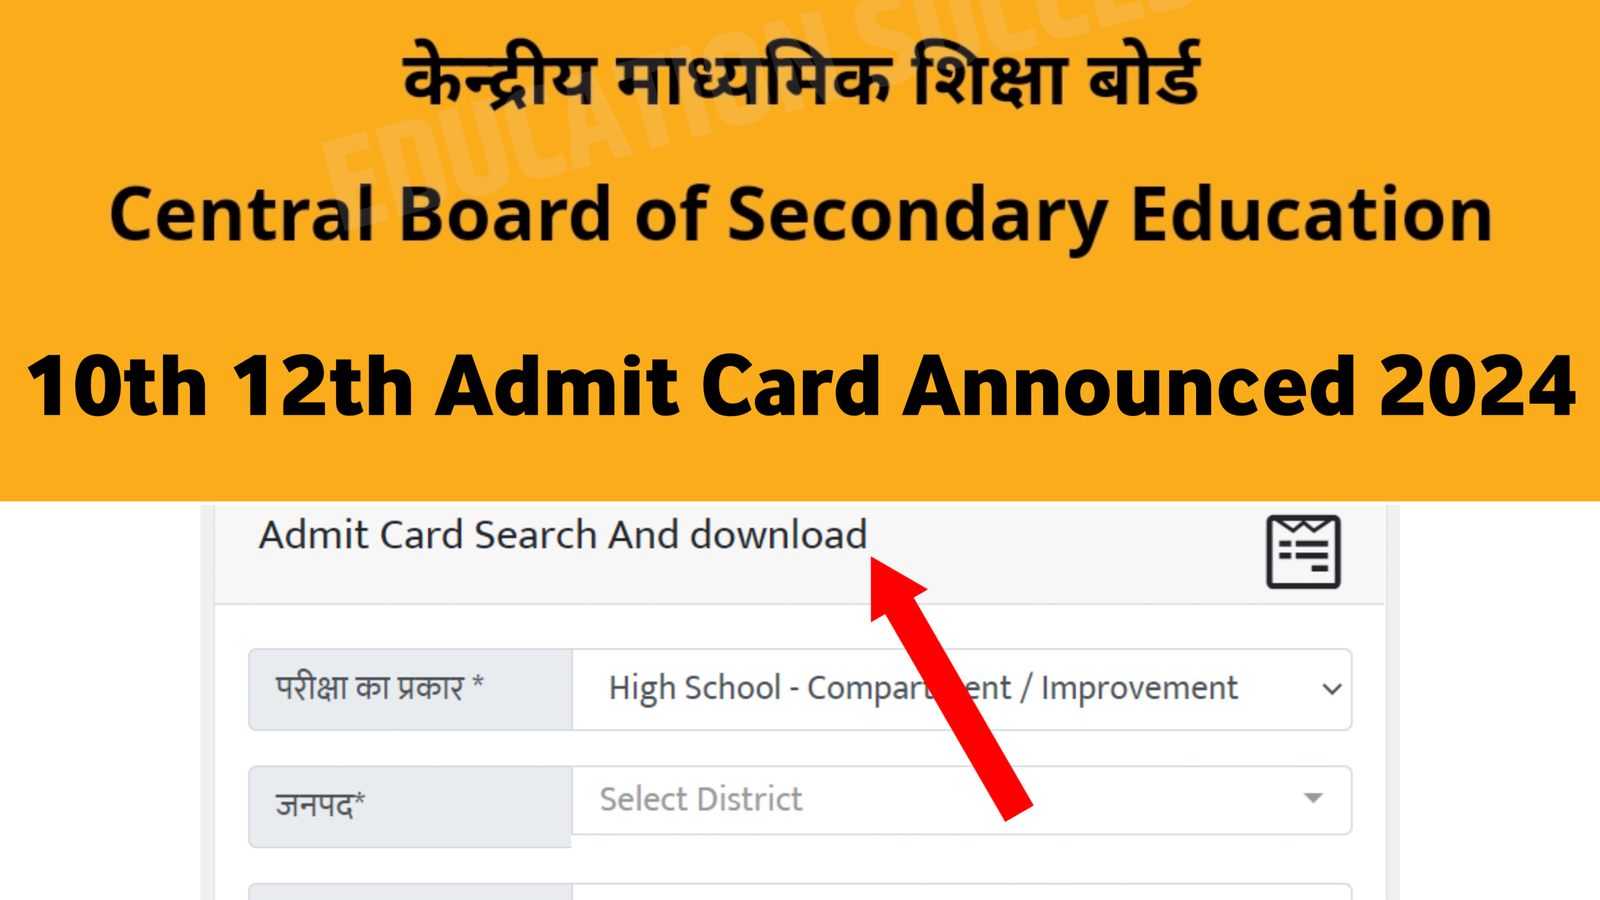 CBSE Board 10th 12th Final Admit Card Today Release: 